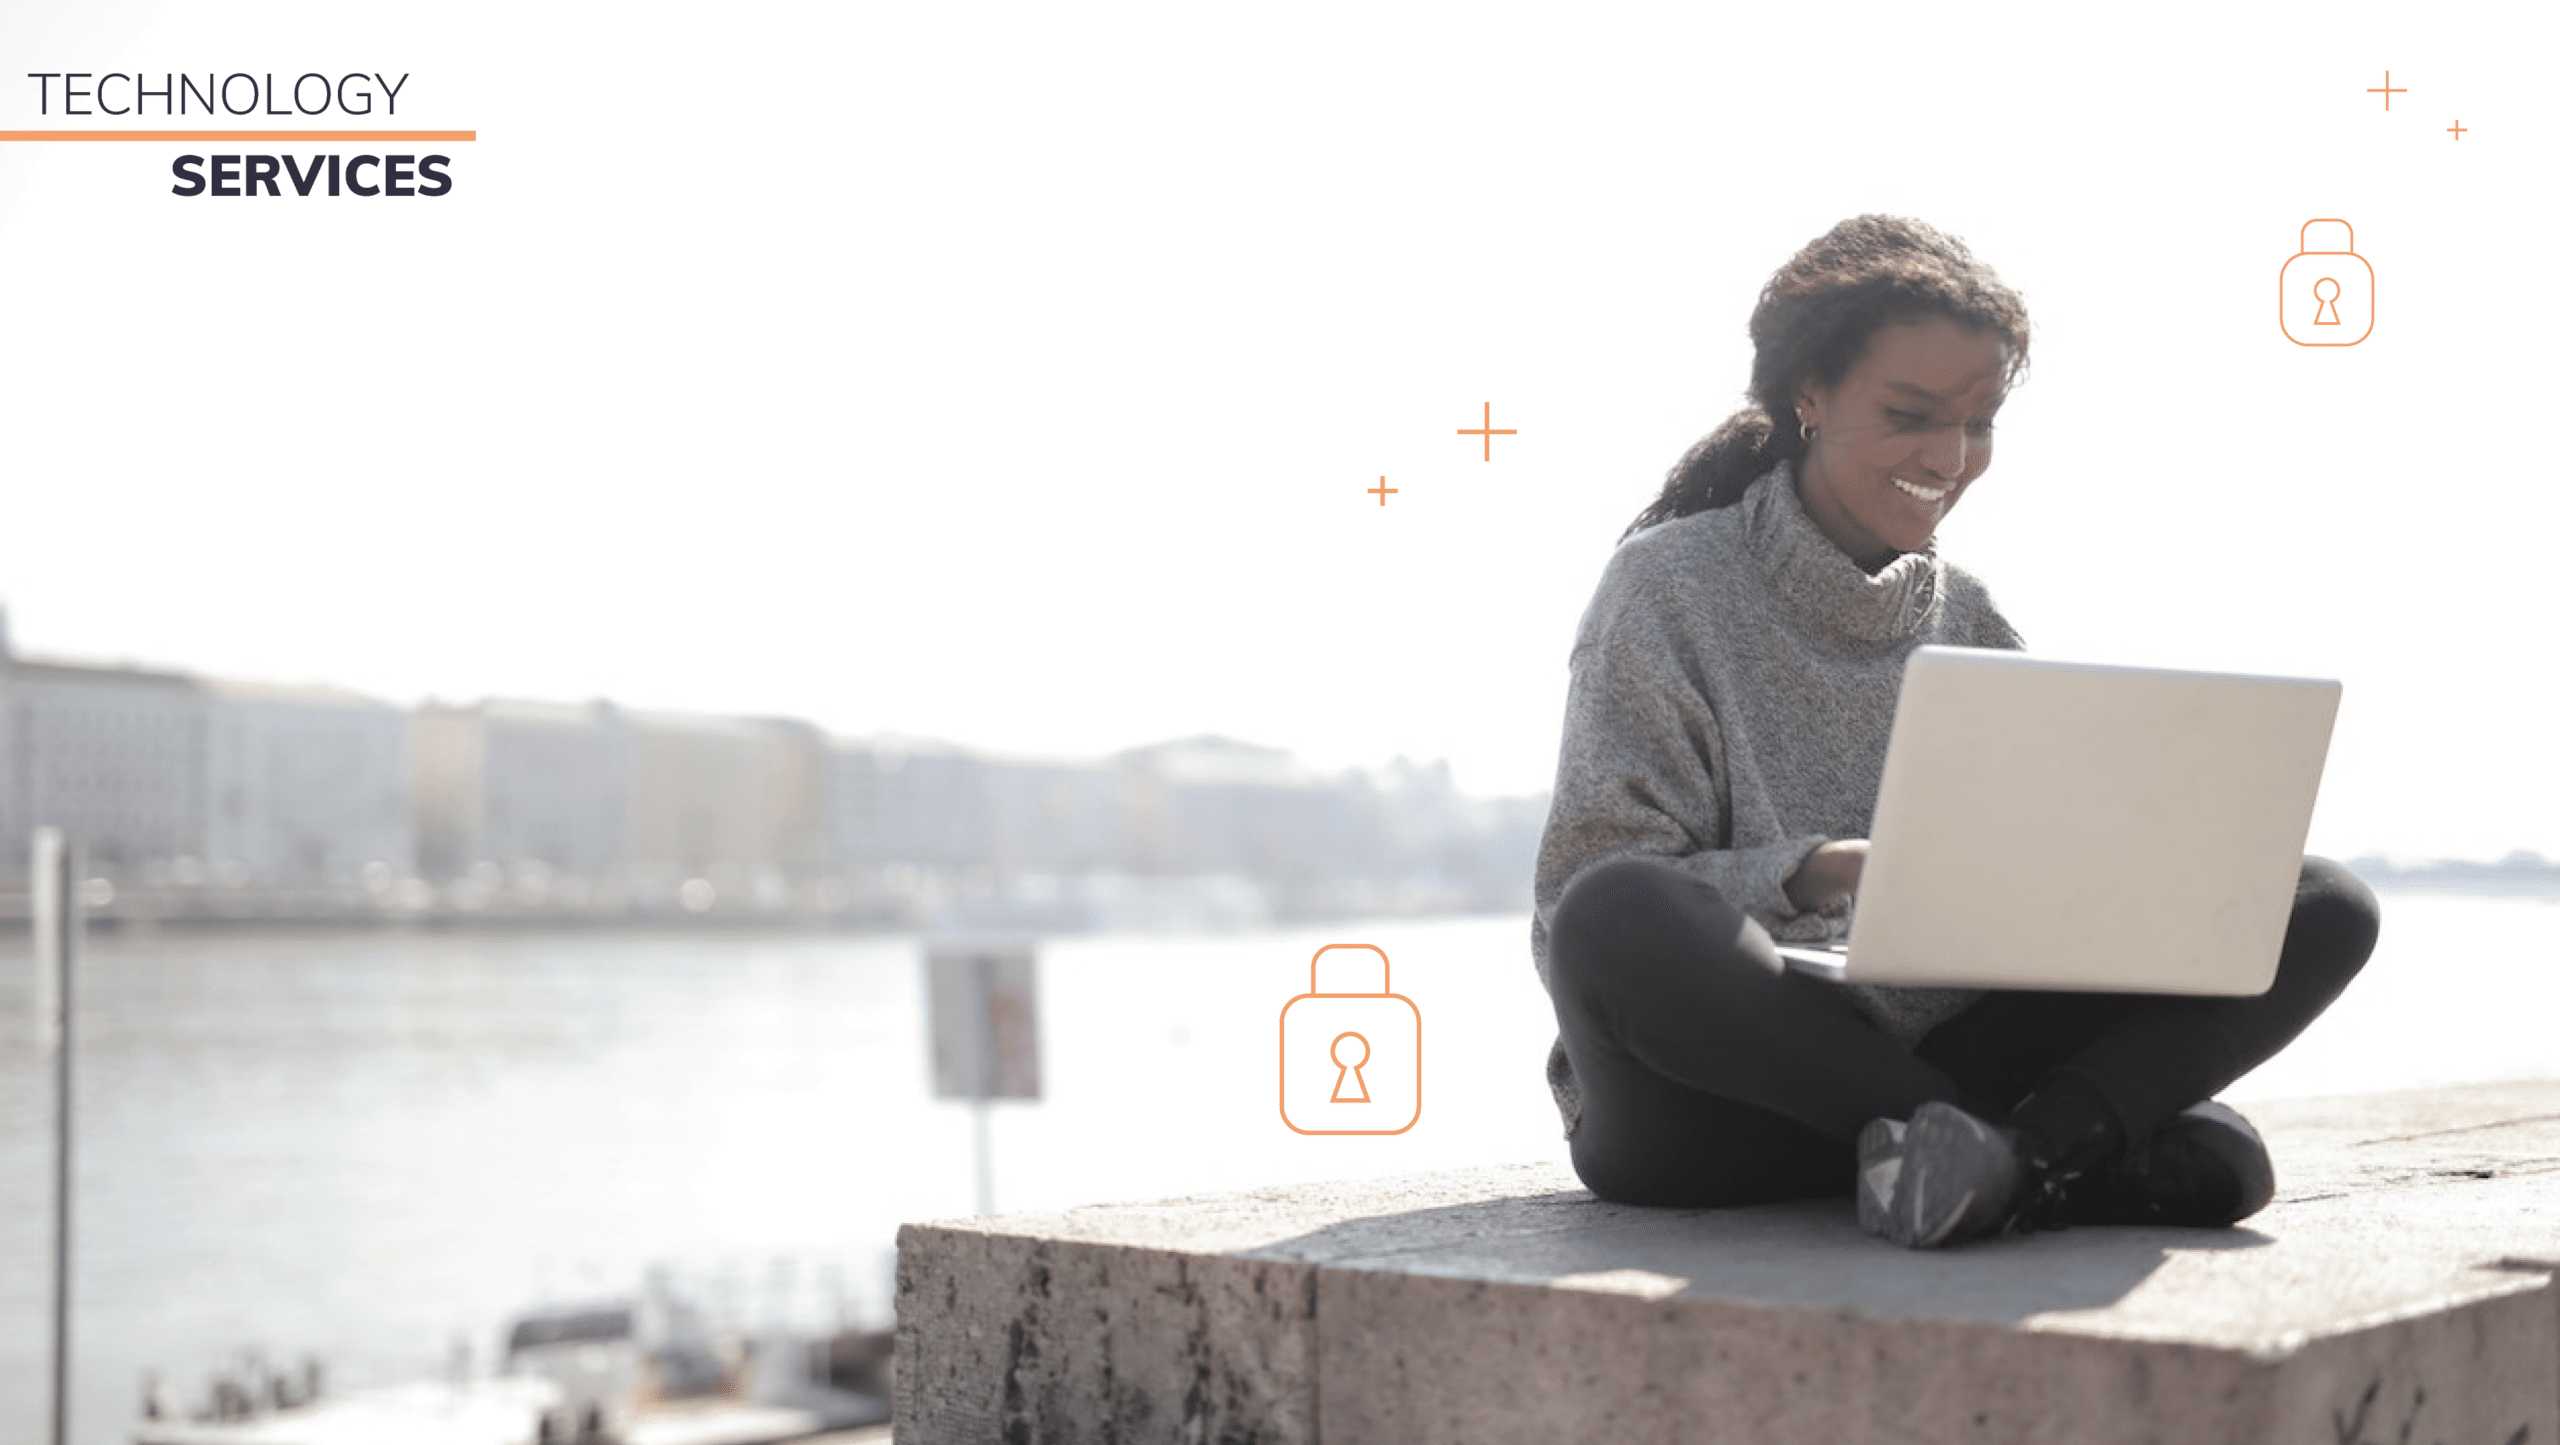 Image of woman sitting by water on her laptop.